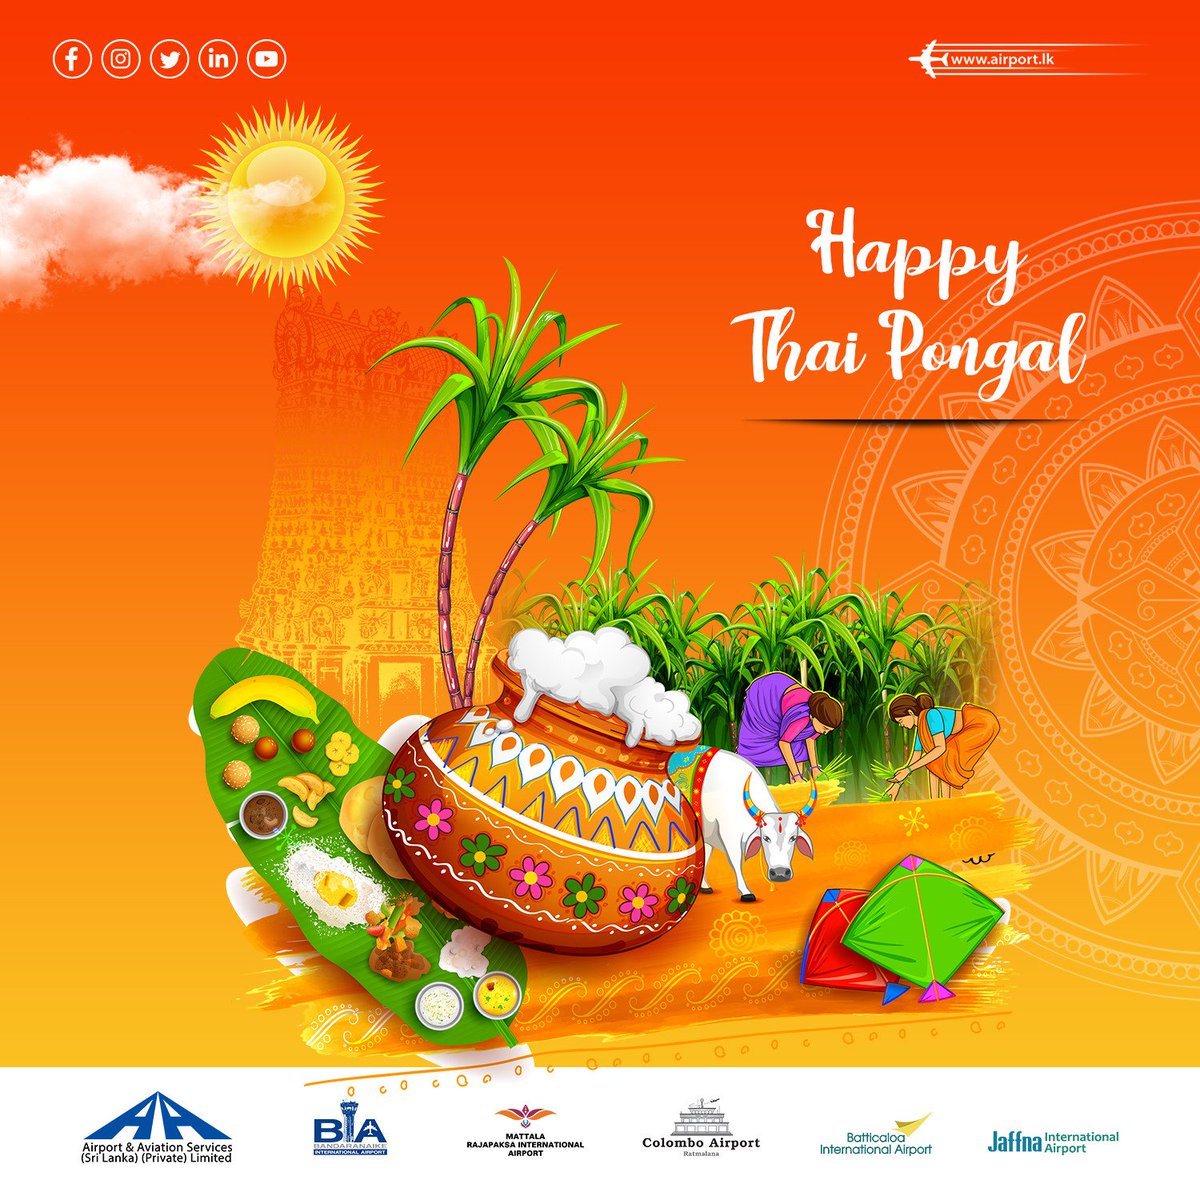 Wishing you a sky full of prosperity and joy on this auspicious Thai Pongal Day! ✈️ #BIAsrilanka #SriLankaAirports #HappyThaiPongal